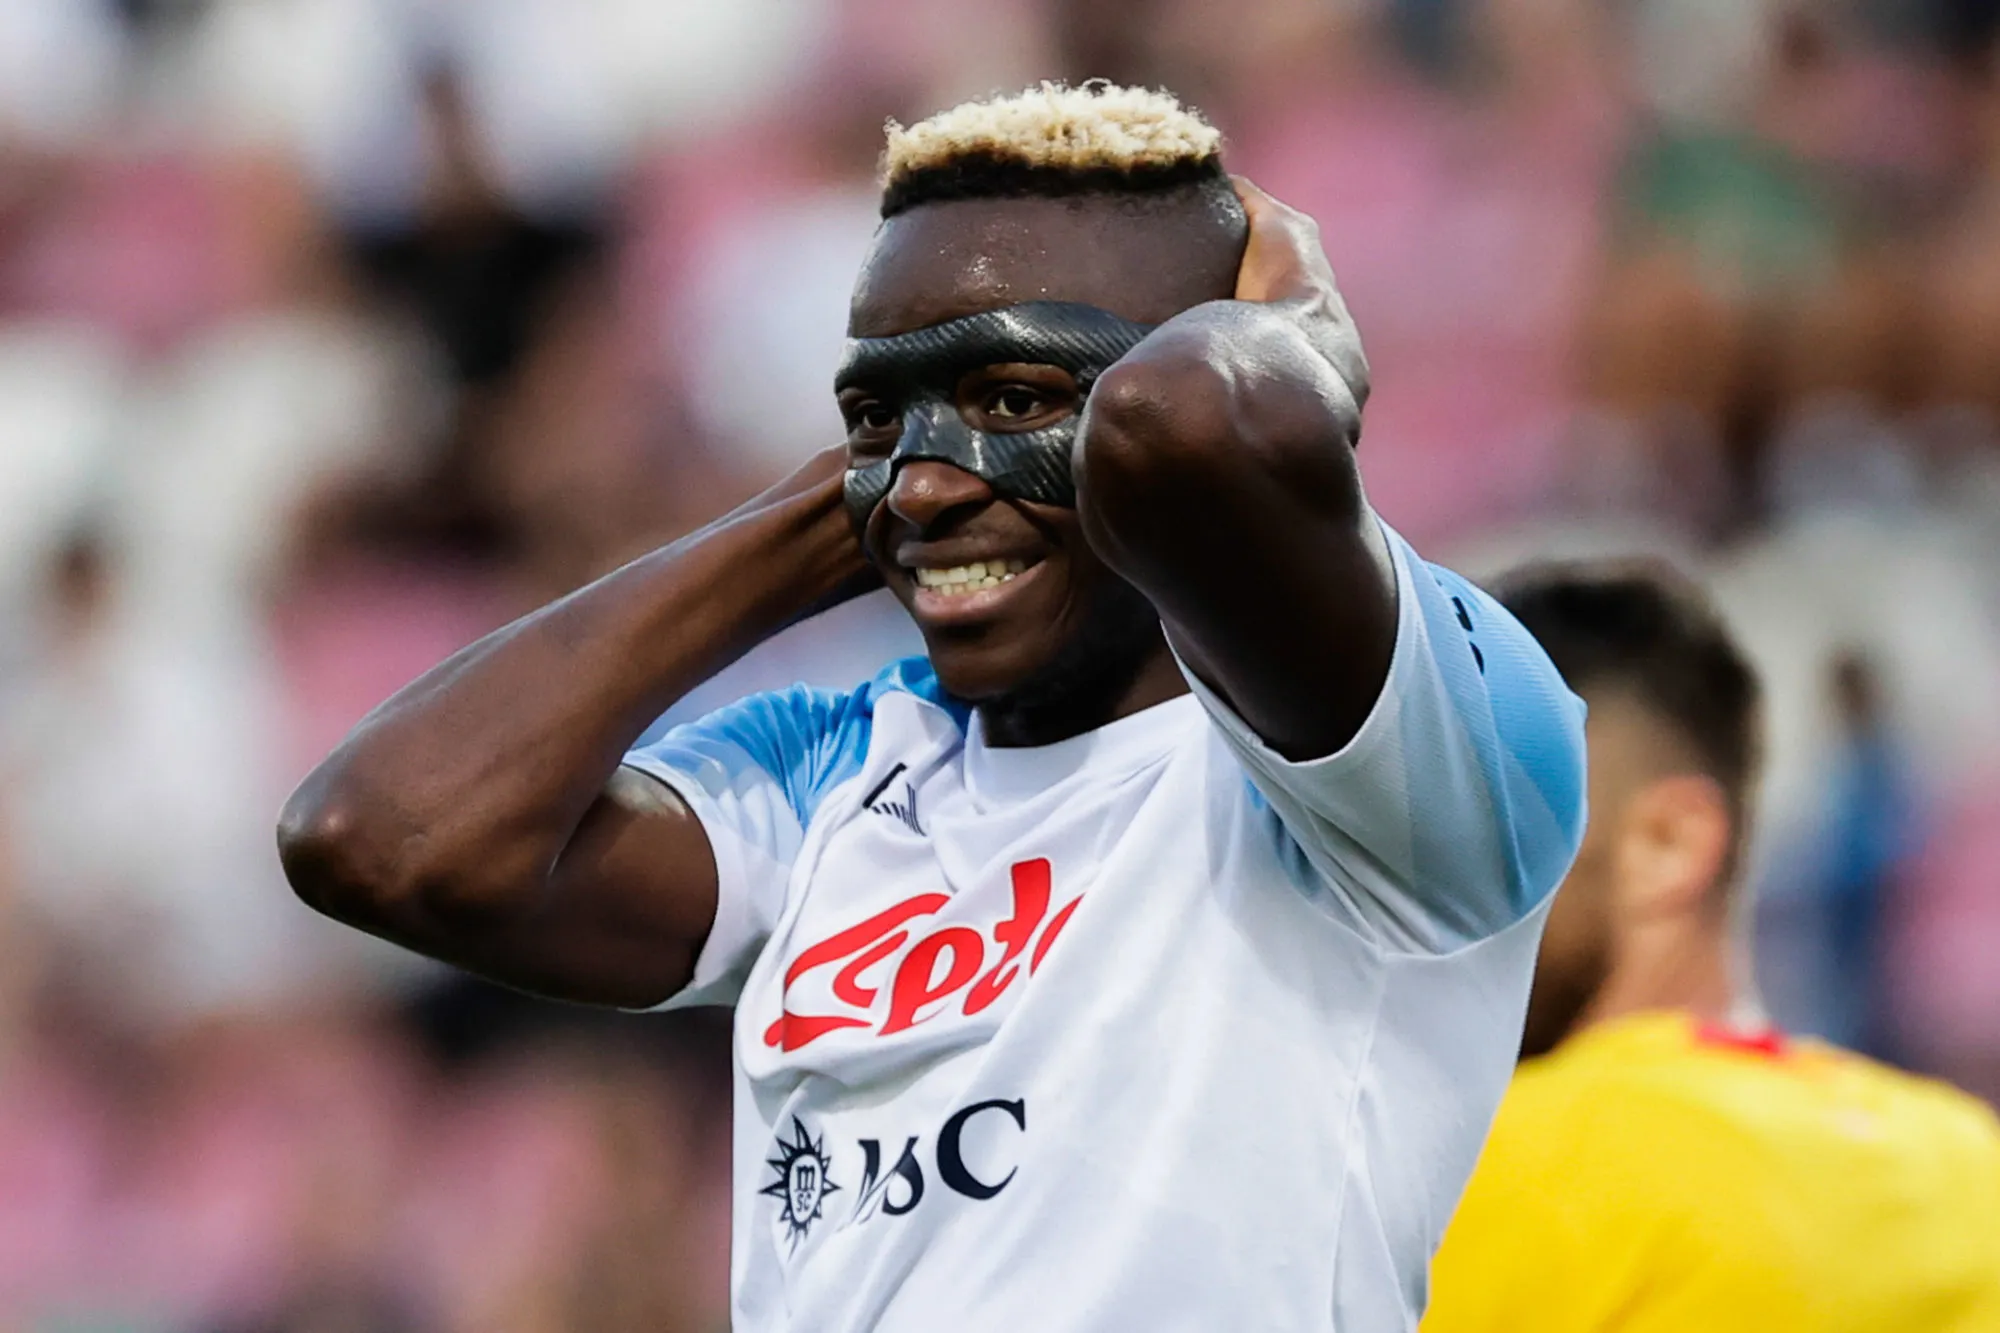 3rd August 2022; Patin Stadium, Castel Di Sangro , Italy; Friendly football, SSC Napoli versus Girona FC: Victor Osimhen of Napoli - Photo by Icon sport